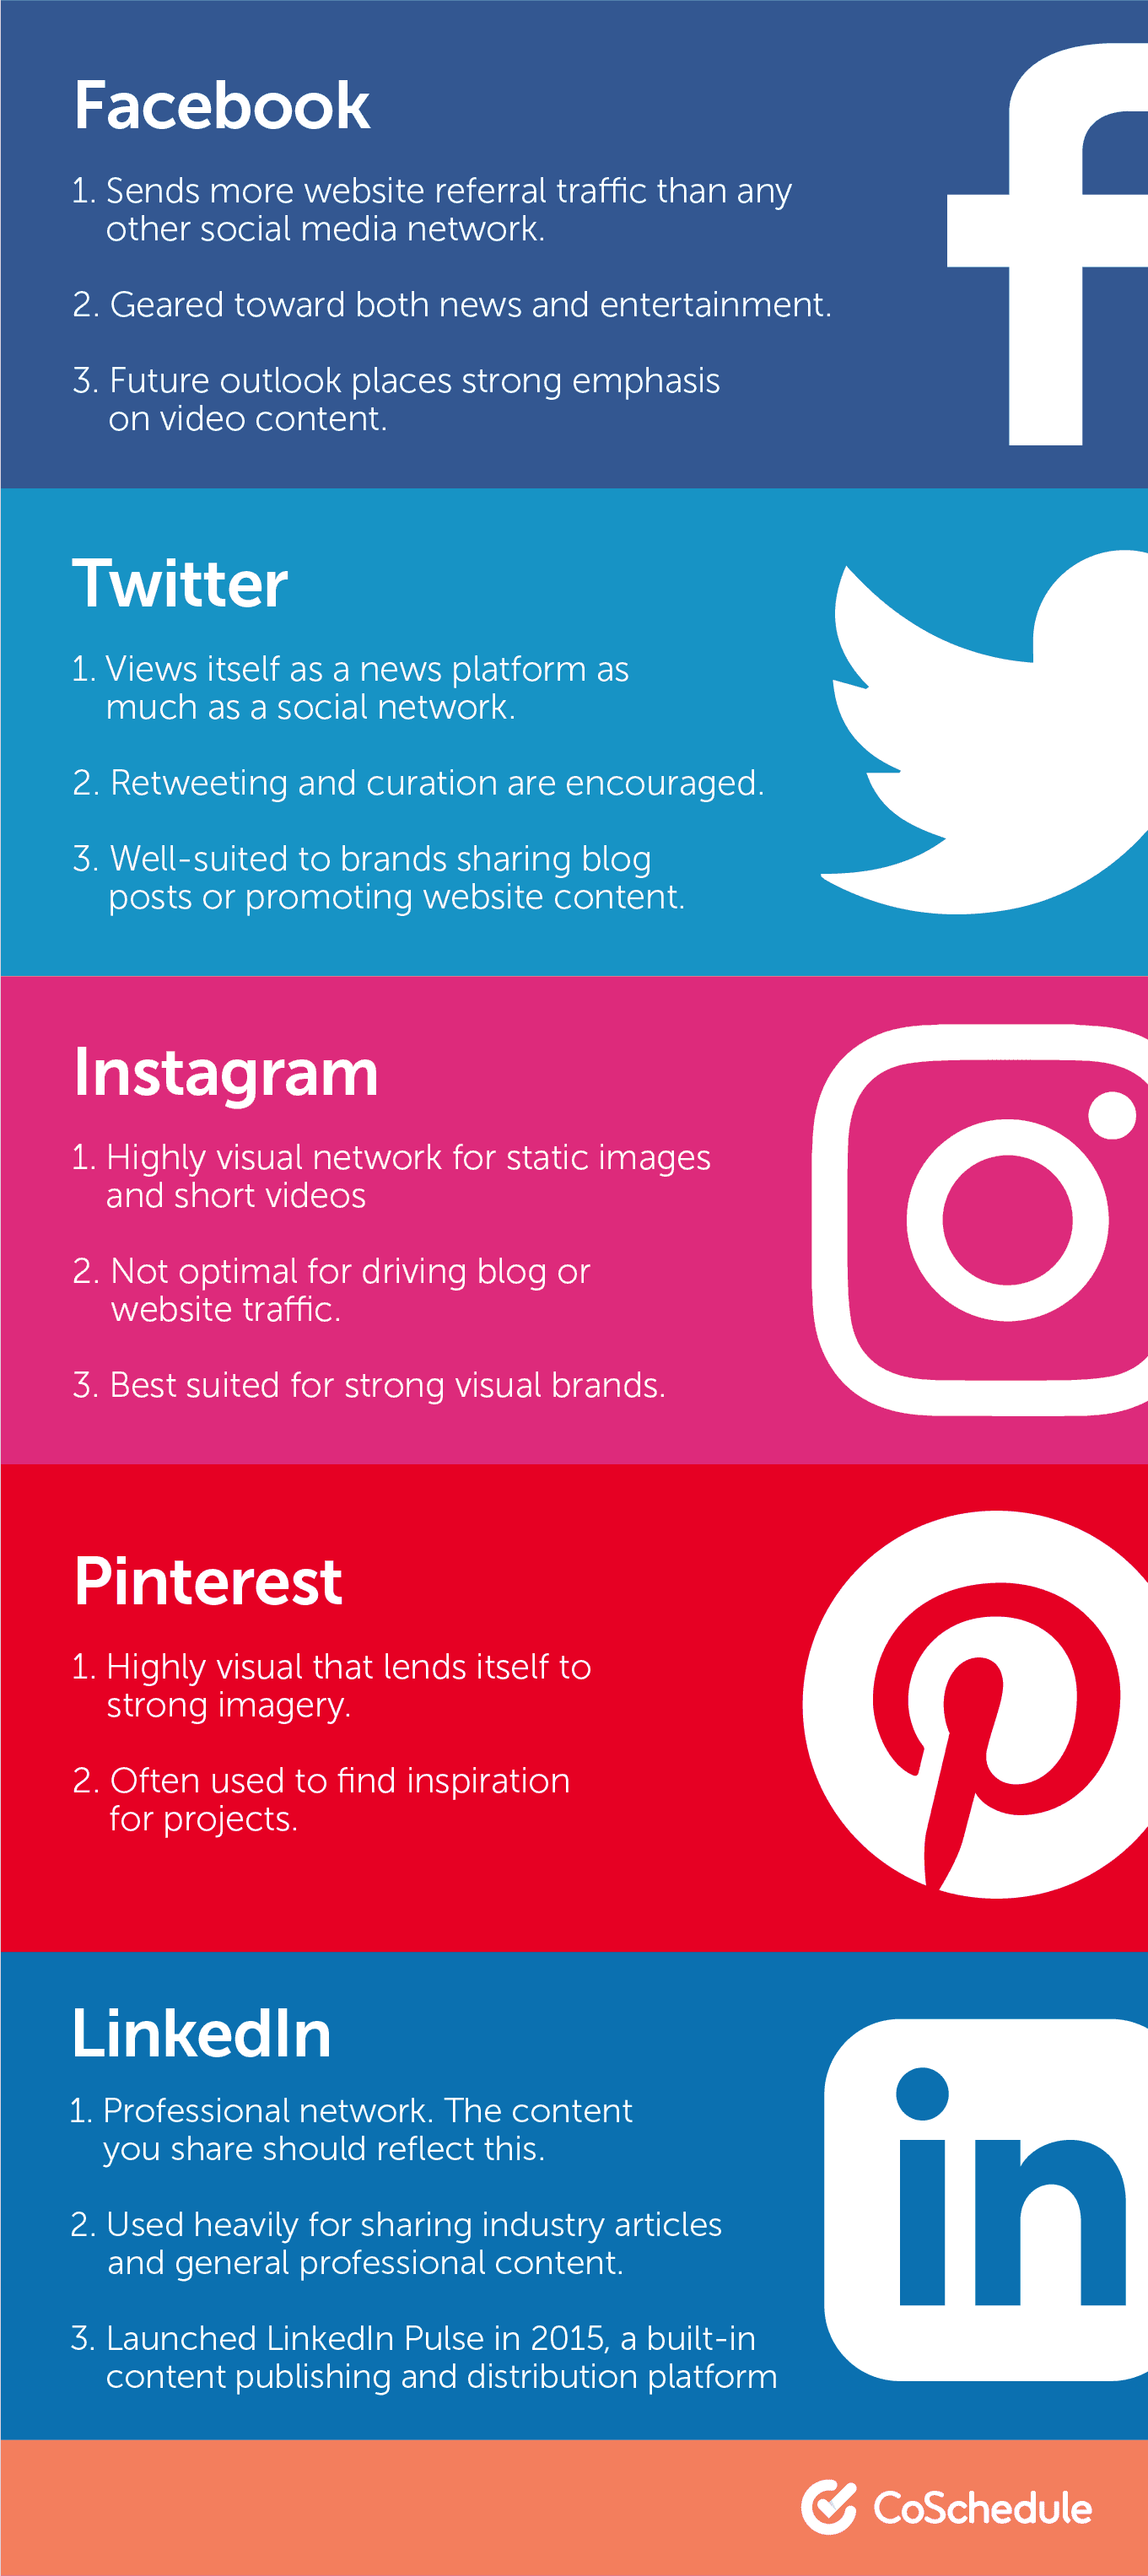 How to decide which social media network works best for you.